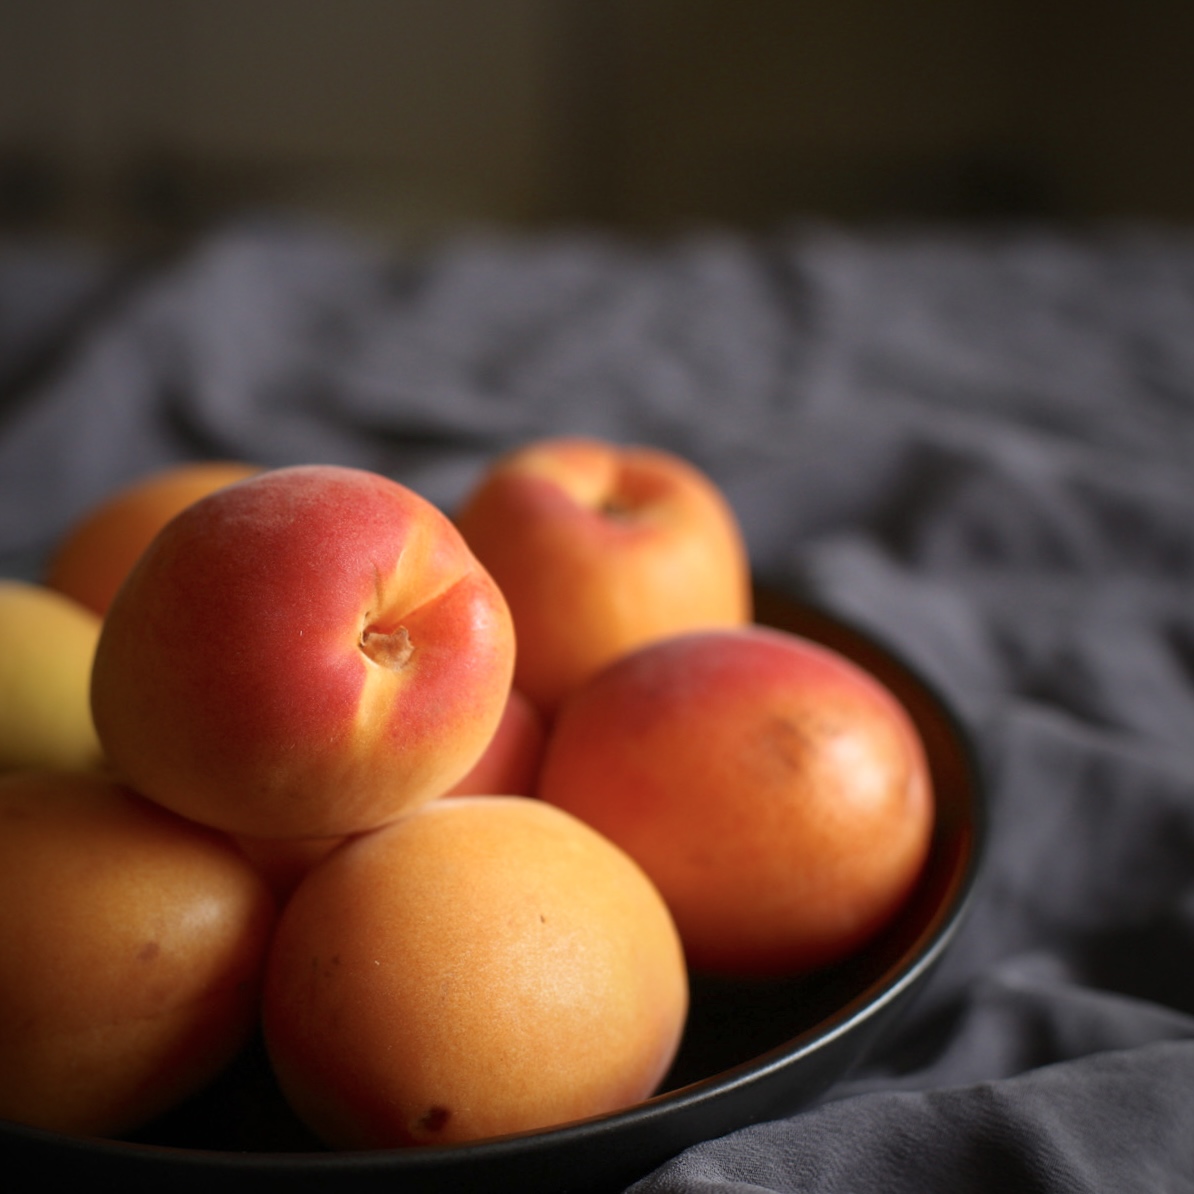 Bright orange apricots with a a red blush in a black bowl on a grey background